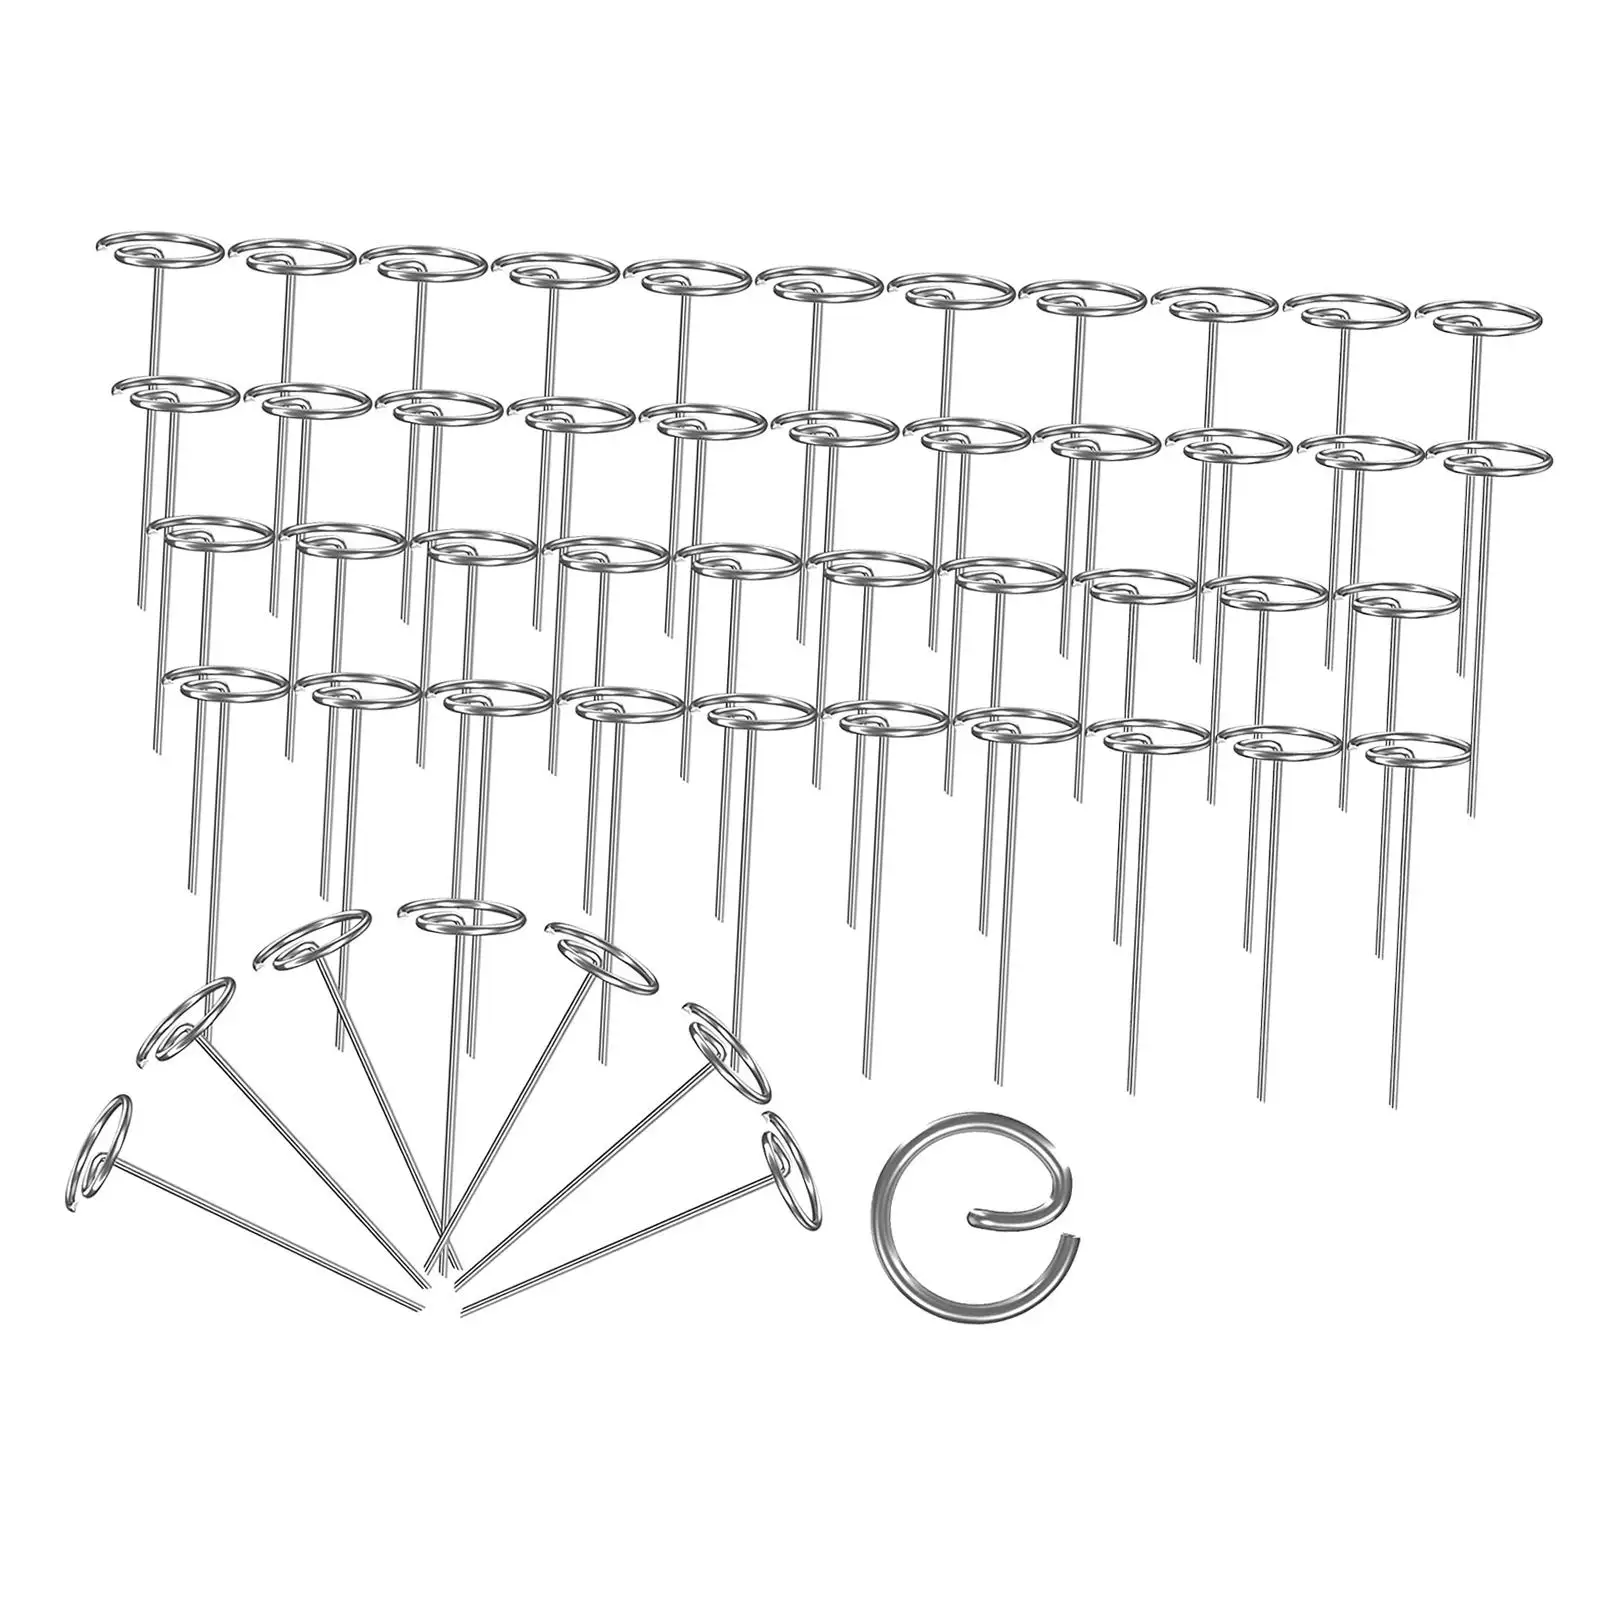 50 Pieces Circle Top Pins Heavy Duty Yard Stakes Landscape Pins sod Staples for Gardening fabric Tent Outdoor